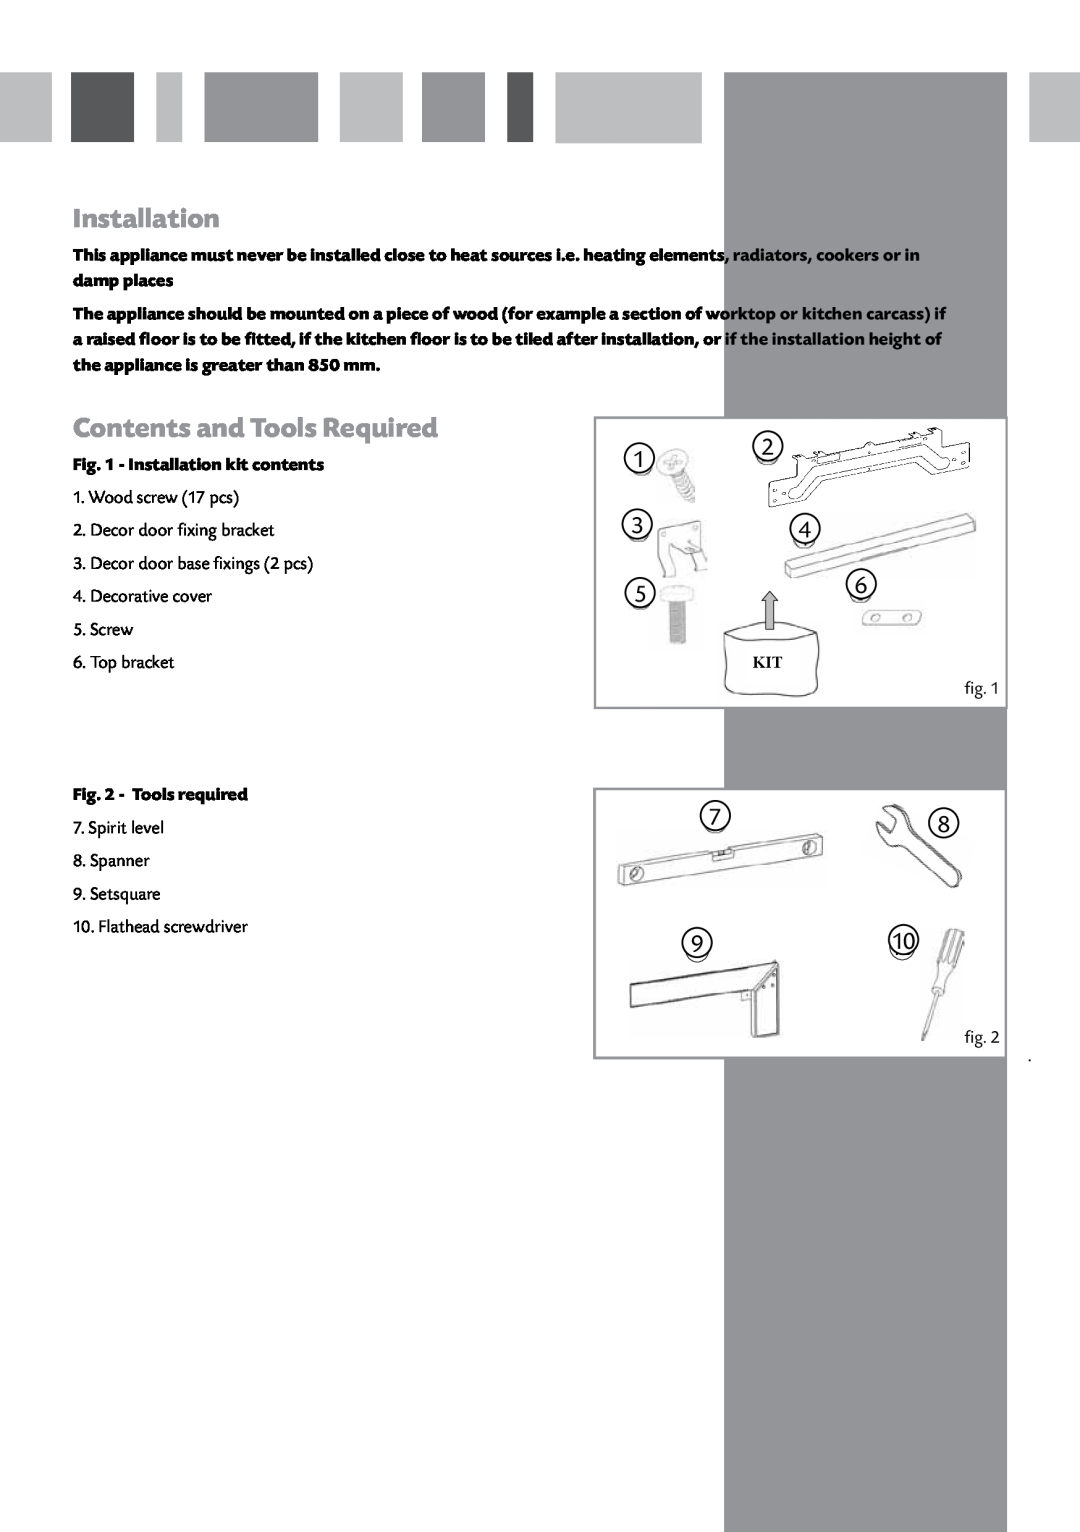 CDA FW282 manual Contents and Tools Required, Installation kit contents, Tools required 